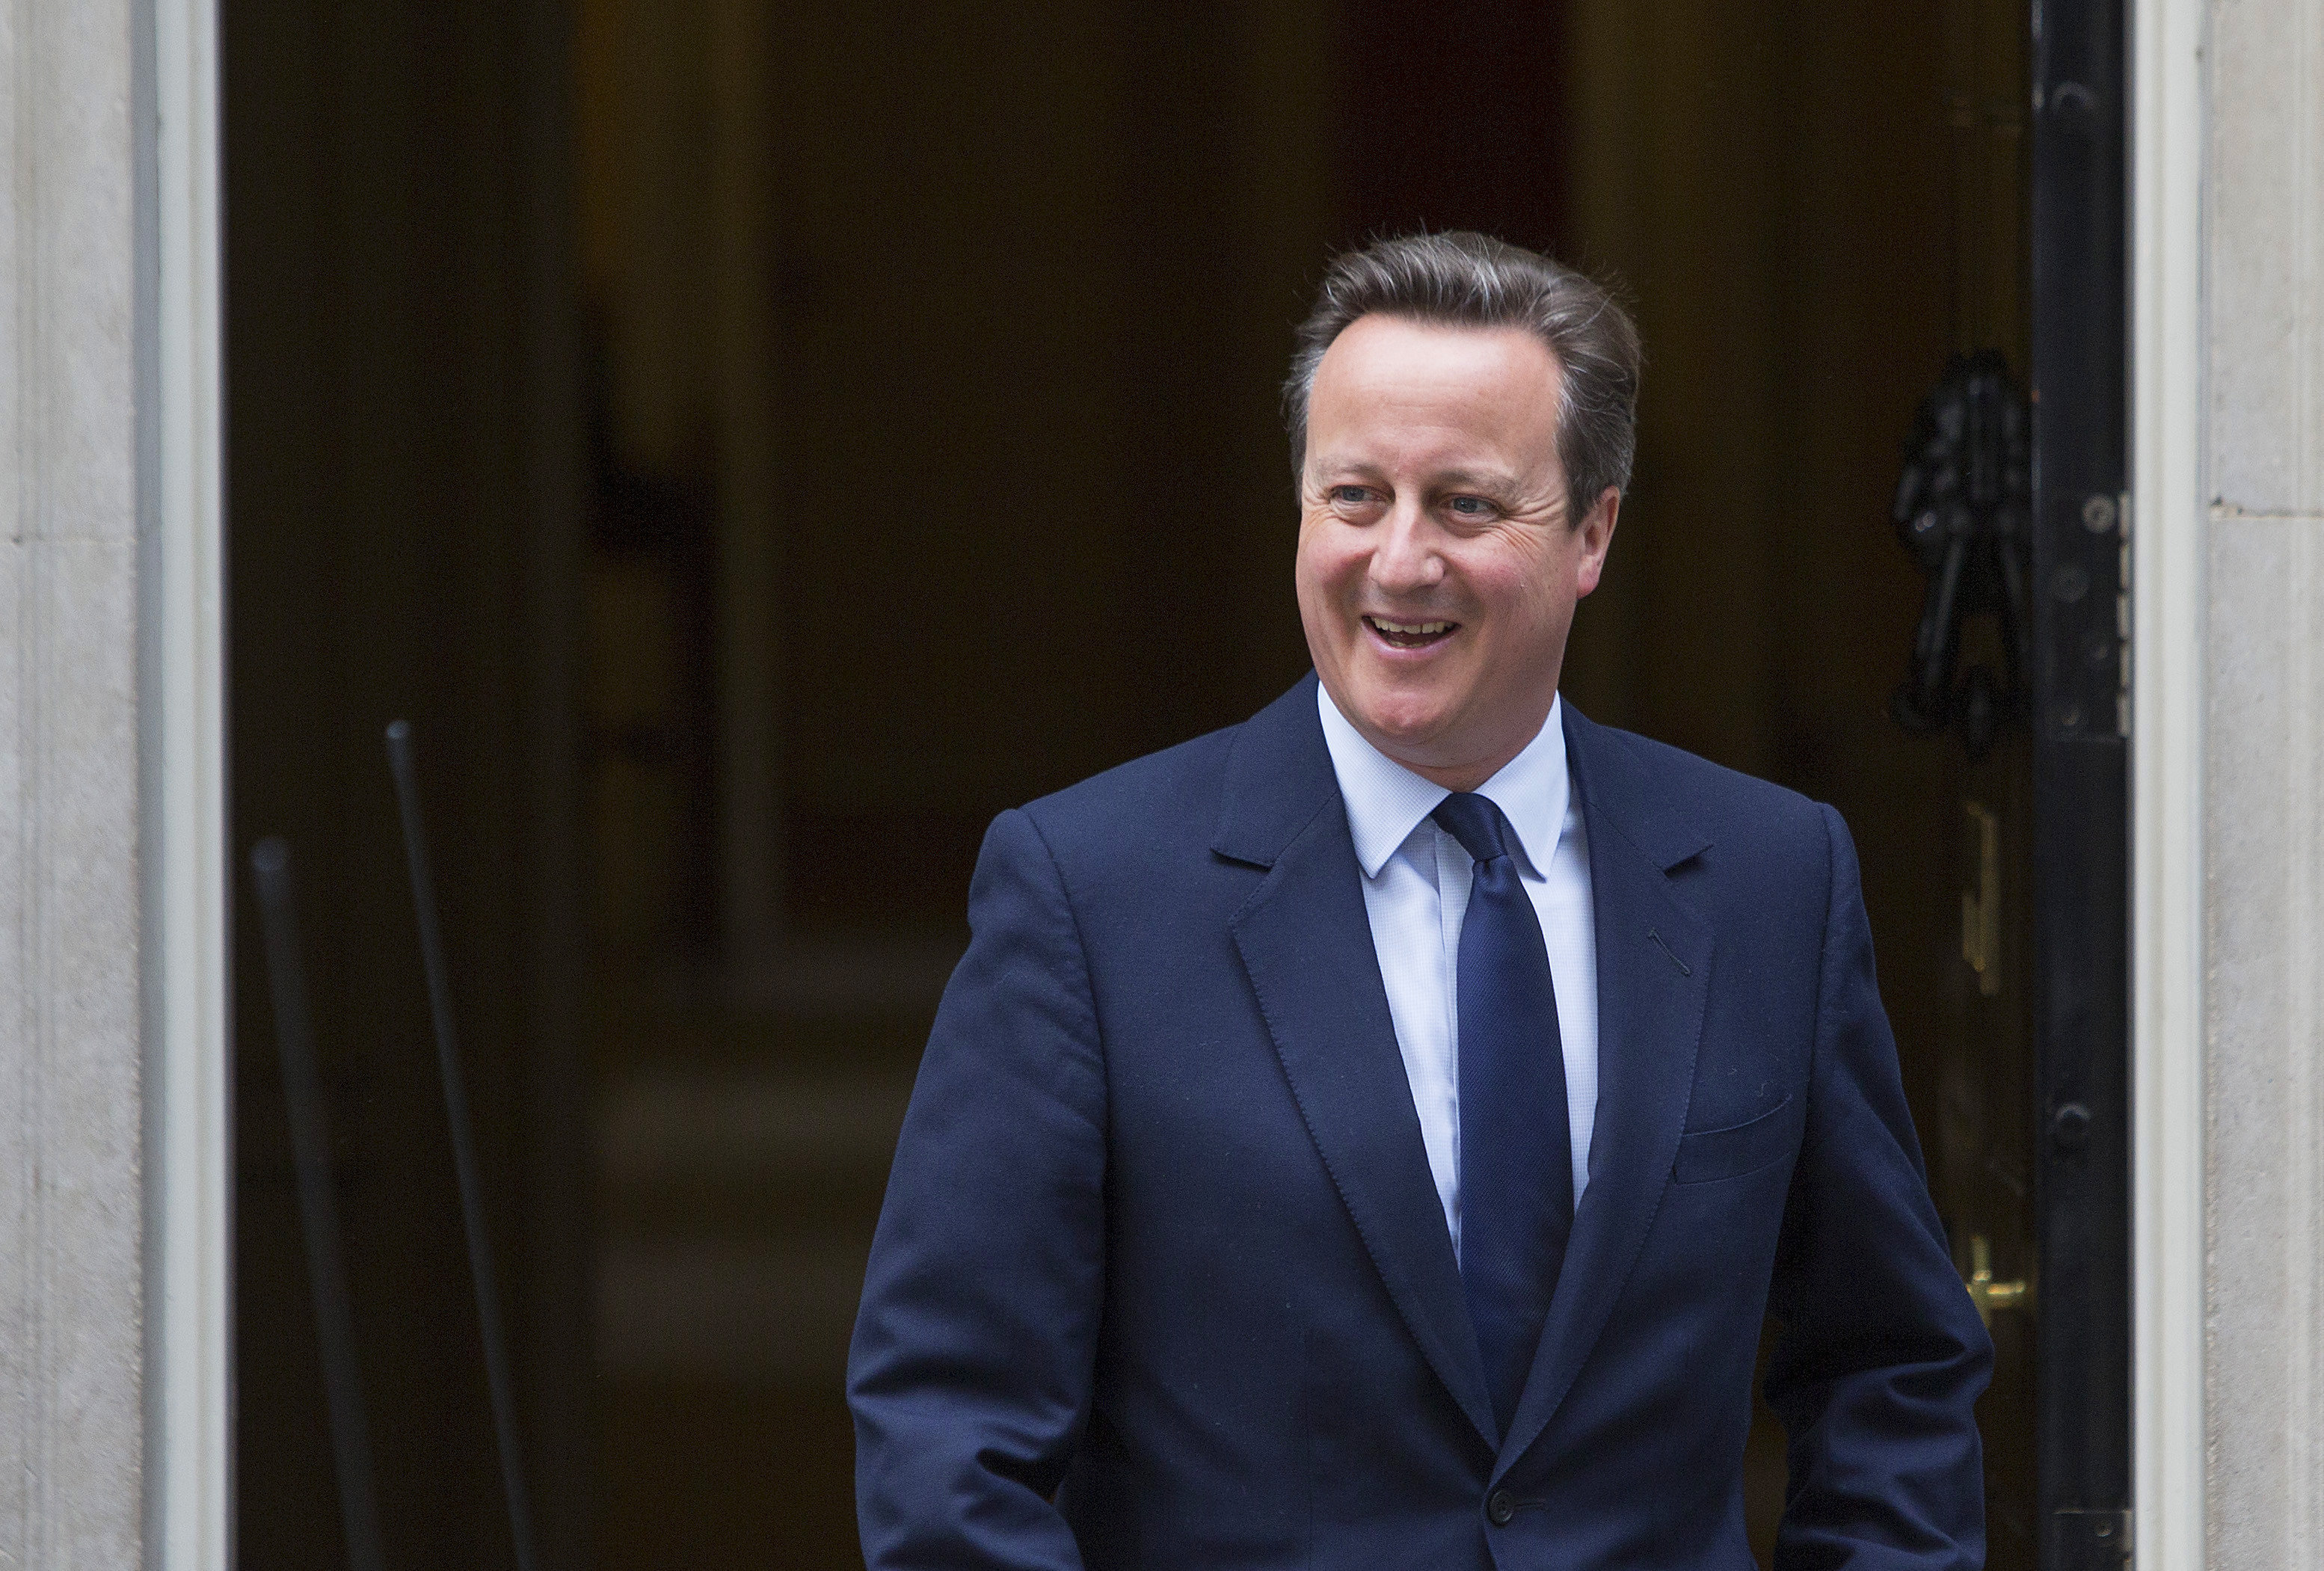 <i>David Cameron&nbsp;was charismatic, and had charm and a sense of humour, says Ben Bradley.</i>